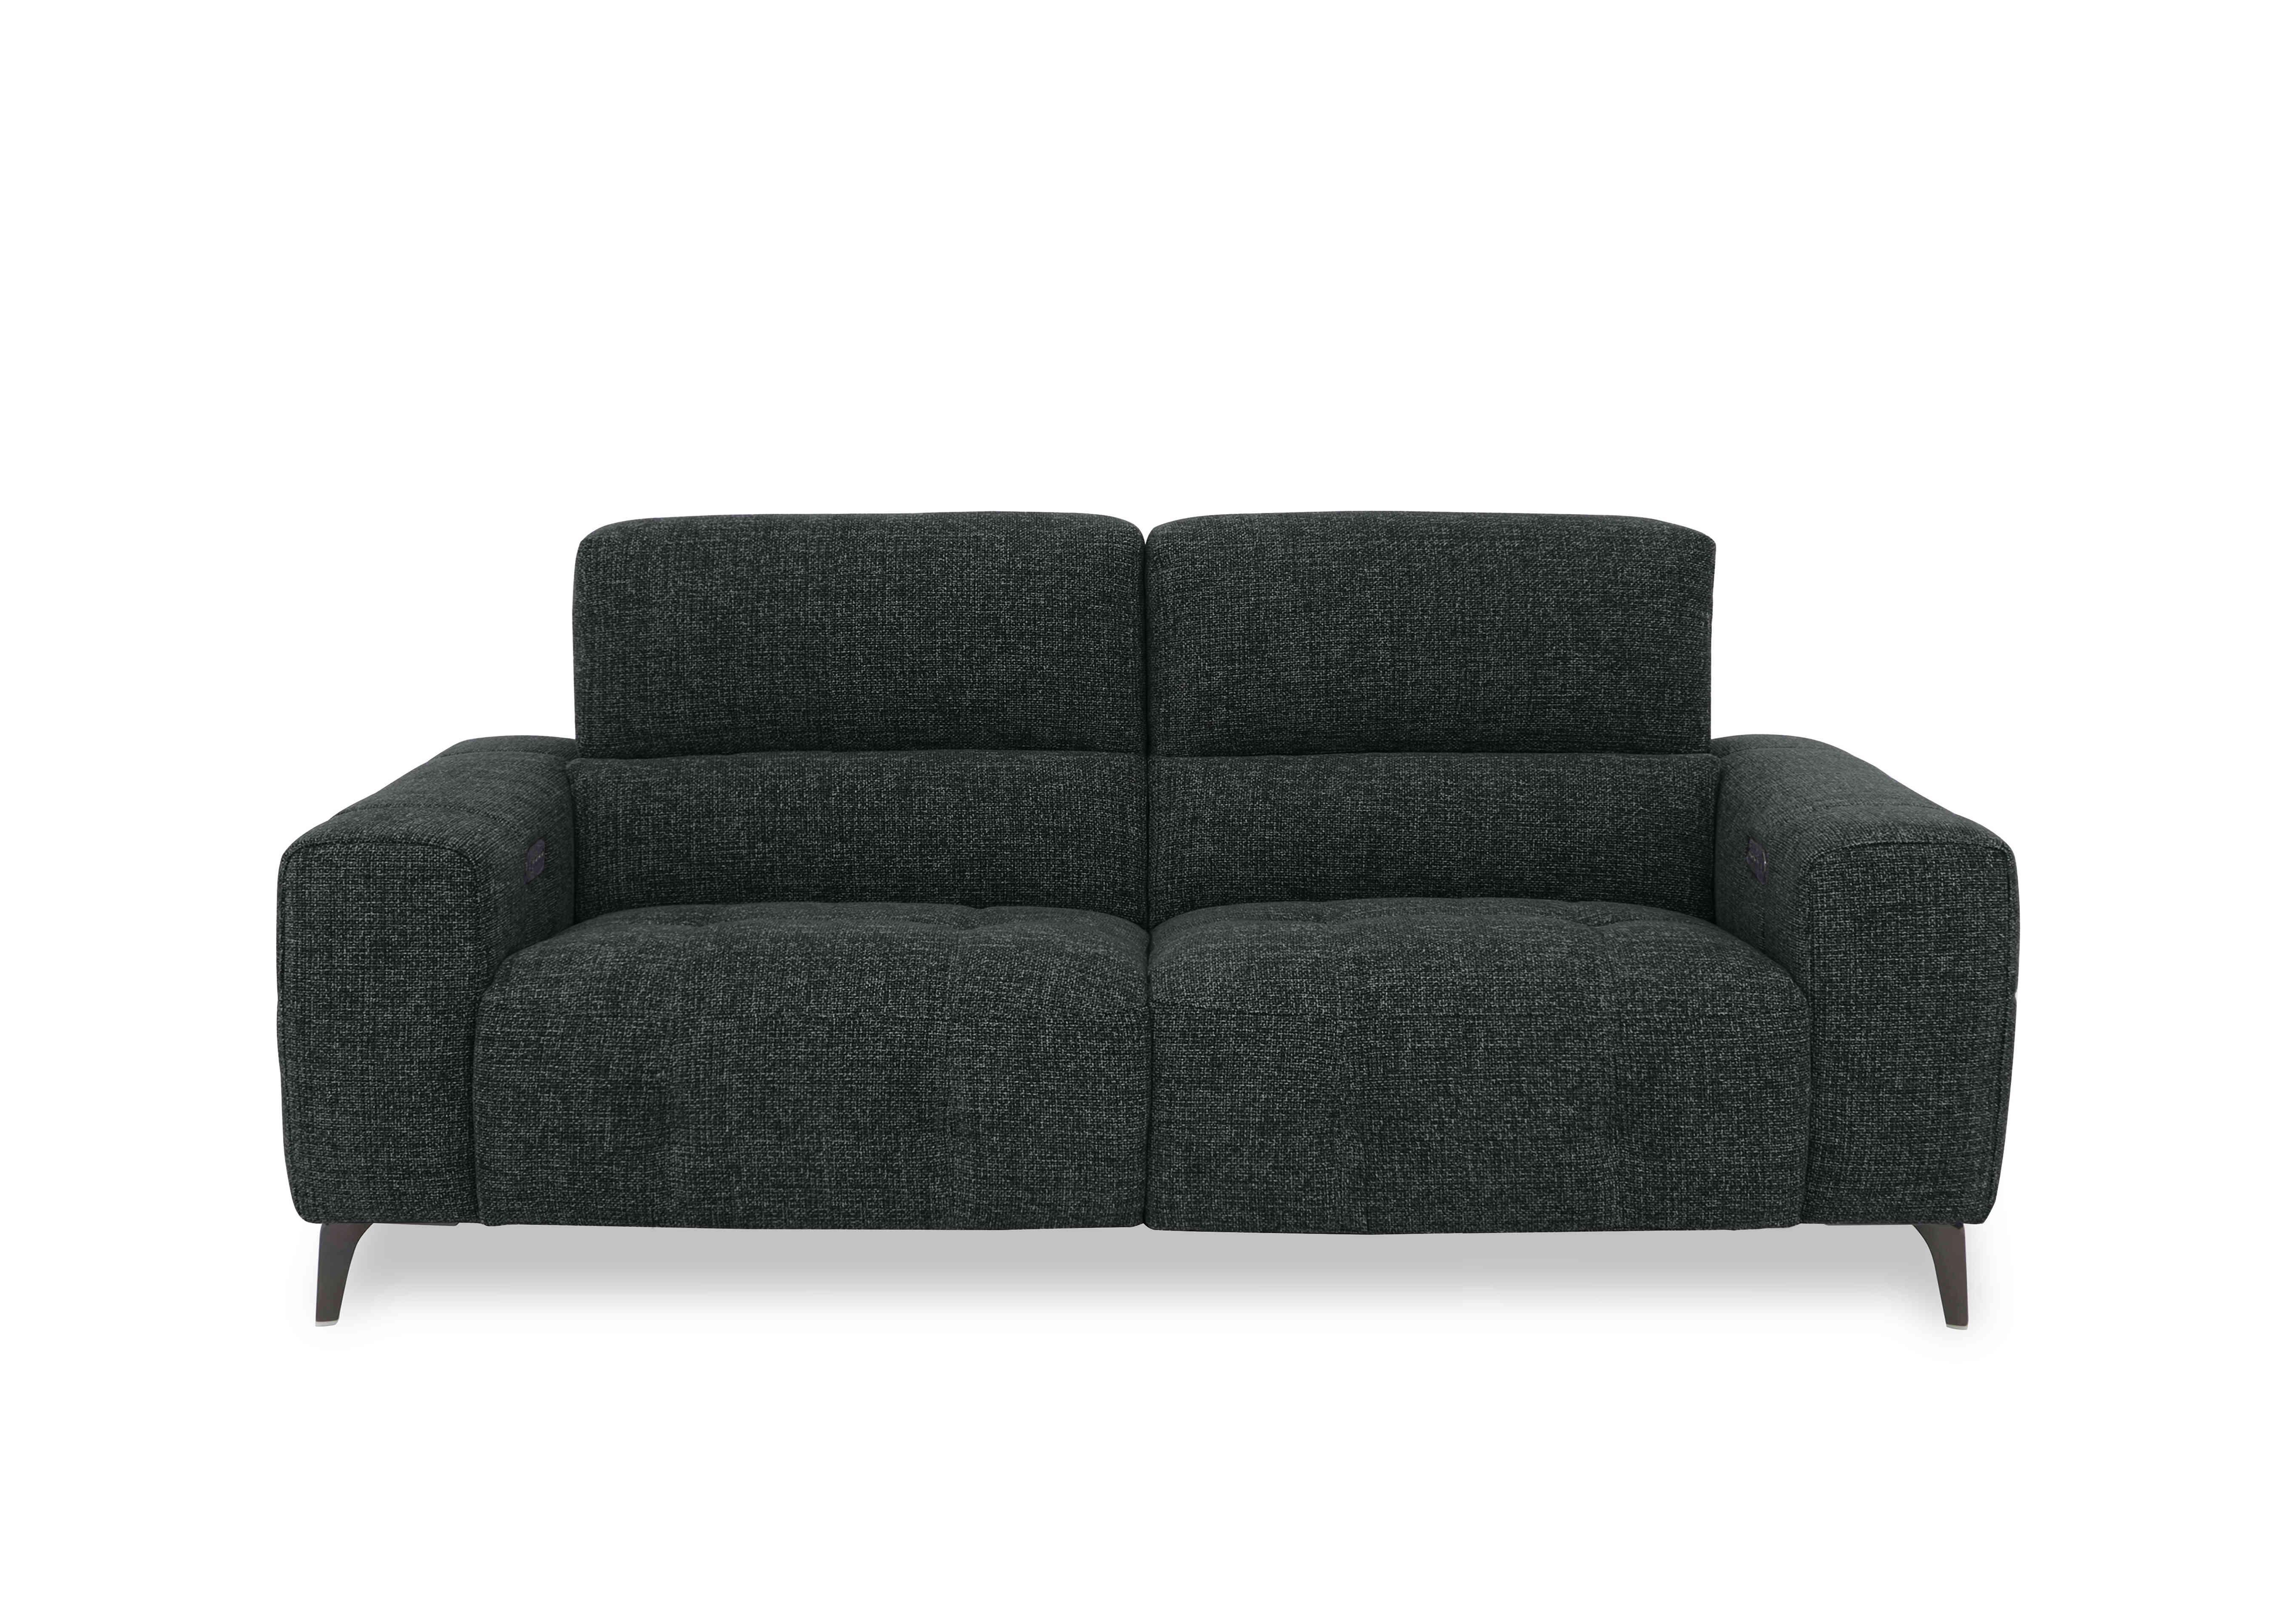 New York 3 Seater Fabric Sofa in Fab-Cac-R463 Black Mica on Furniture Village